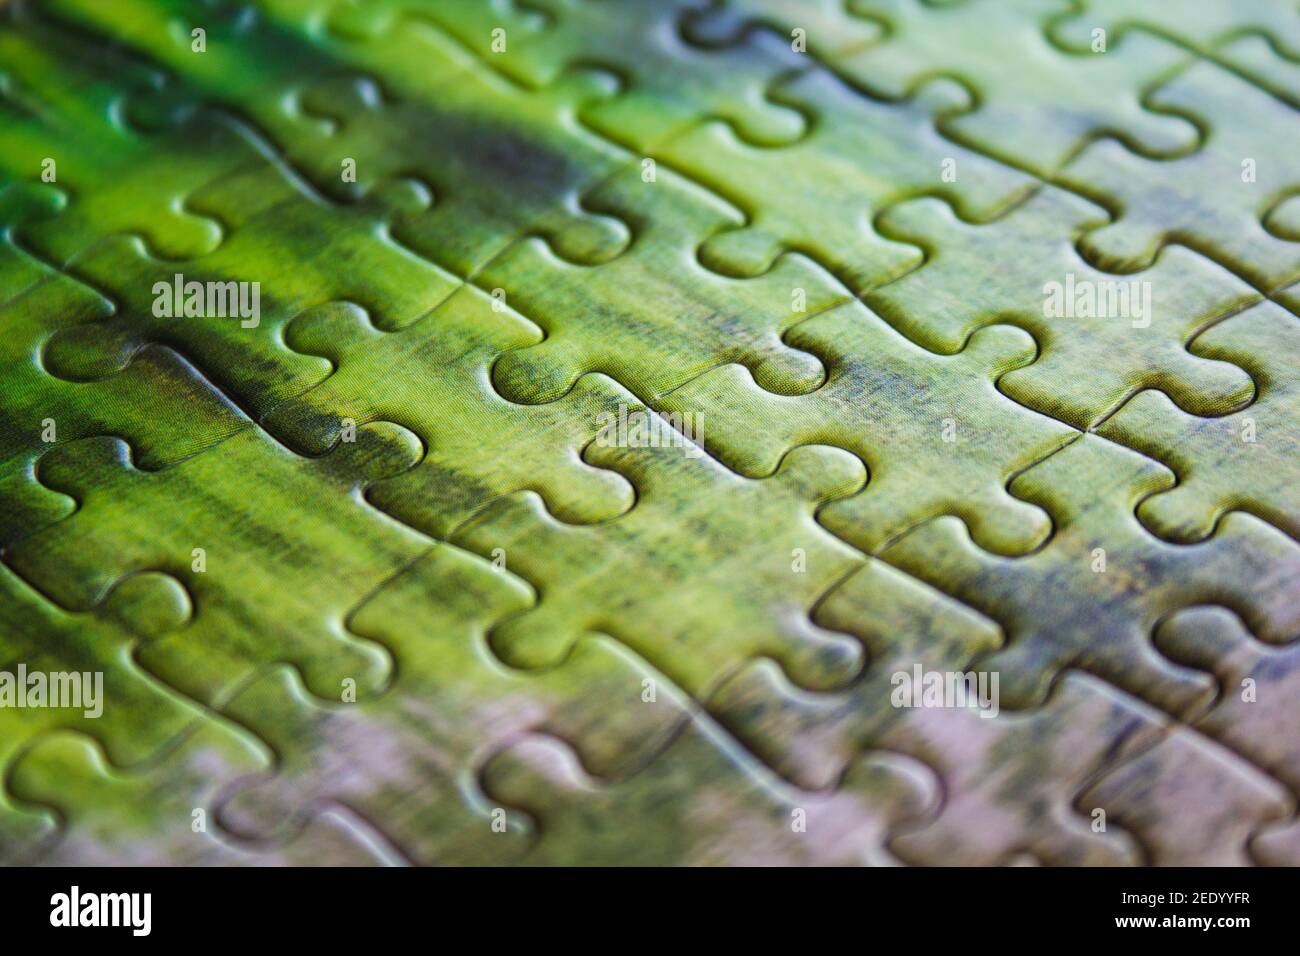 Jigsaw puzzle. Closeup of green jigsaw puzzle peices. Conceptual photo with focus on completed puzzle Stock Photo